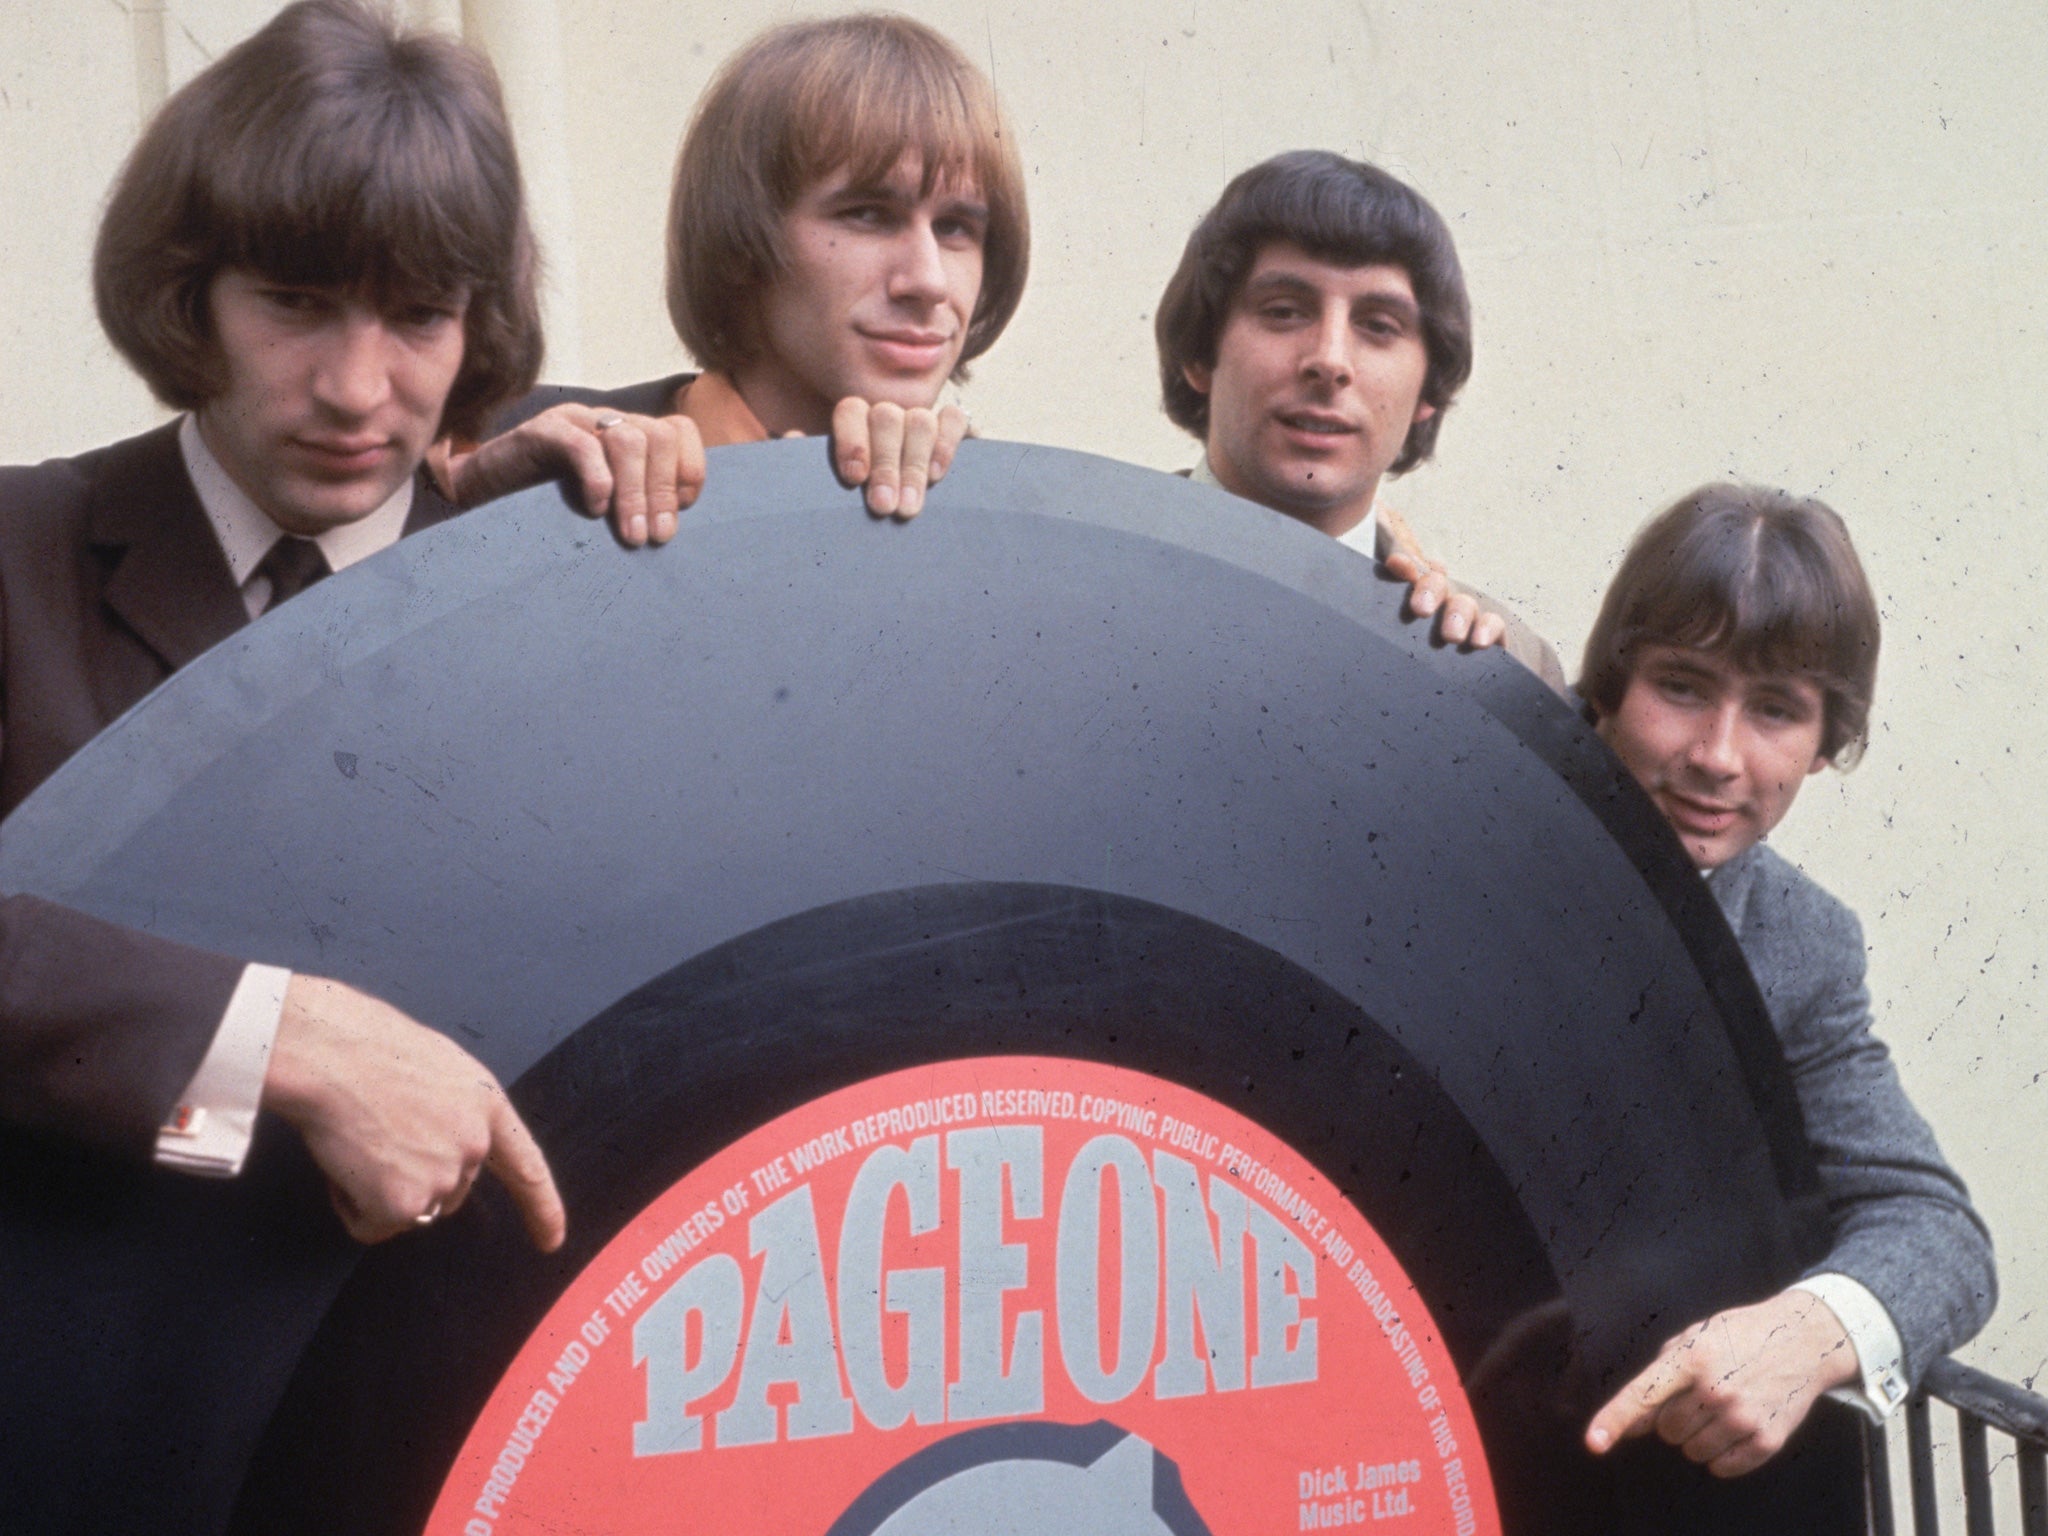 The Troggs in 1965: Ronnie Bond, Chris Britton, Pete Staples and Presley